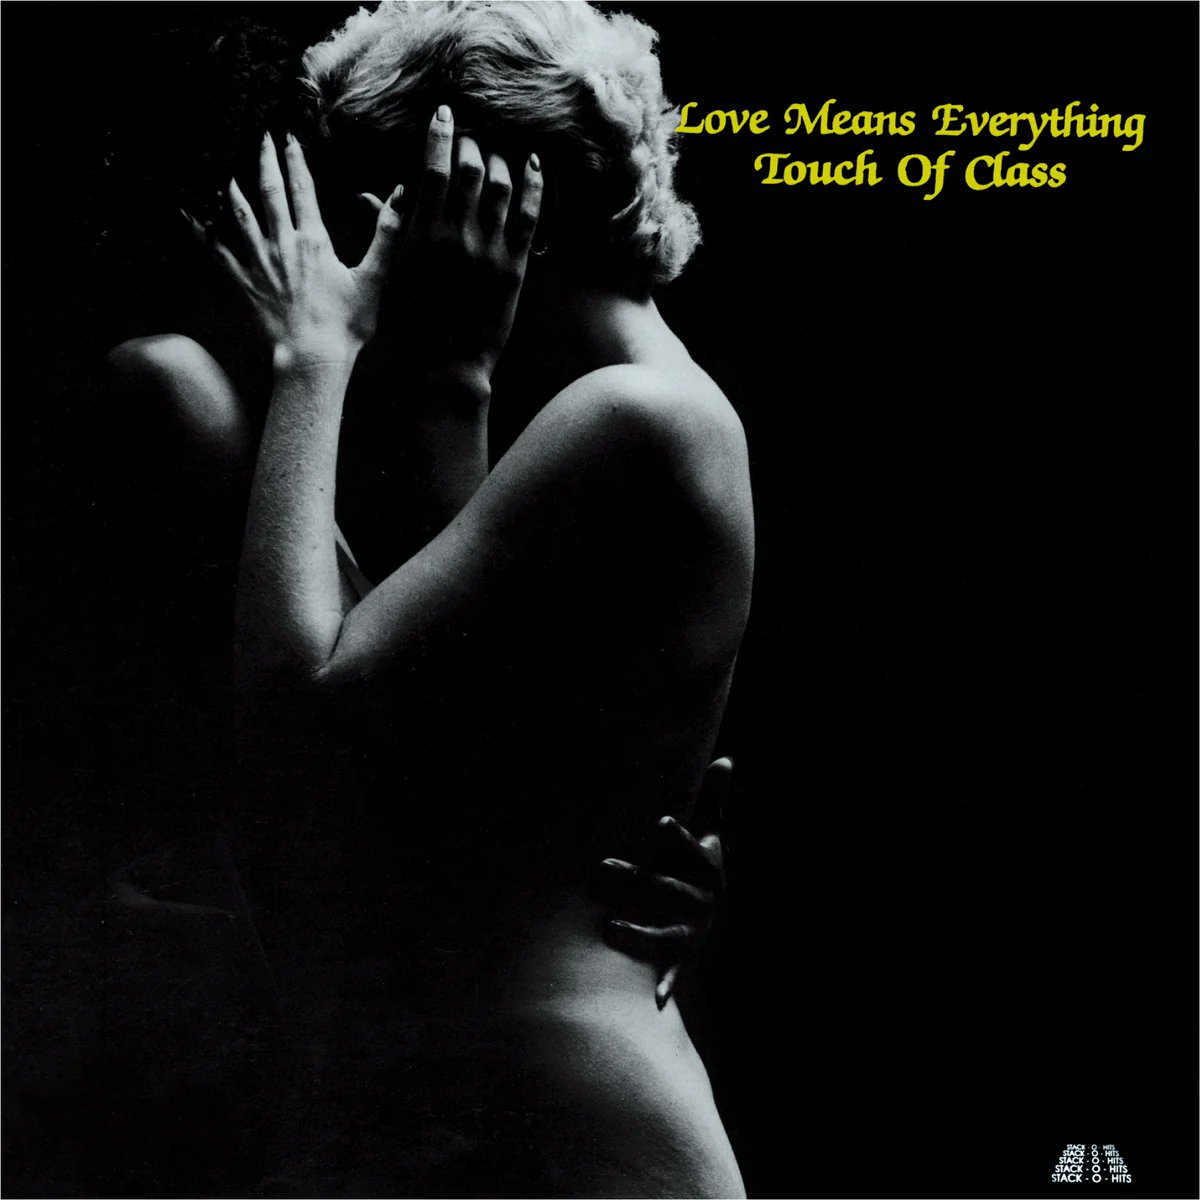 Touch Of Class - Love Means Everything

One of the best soul/funk record ever with beautiful sleeve
youtube.com/watch?v=SsLeF_…

#TouchOfClass #SONG #music #soulmusic #SOUL #Funk #funkmusic